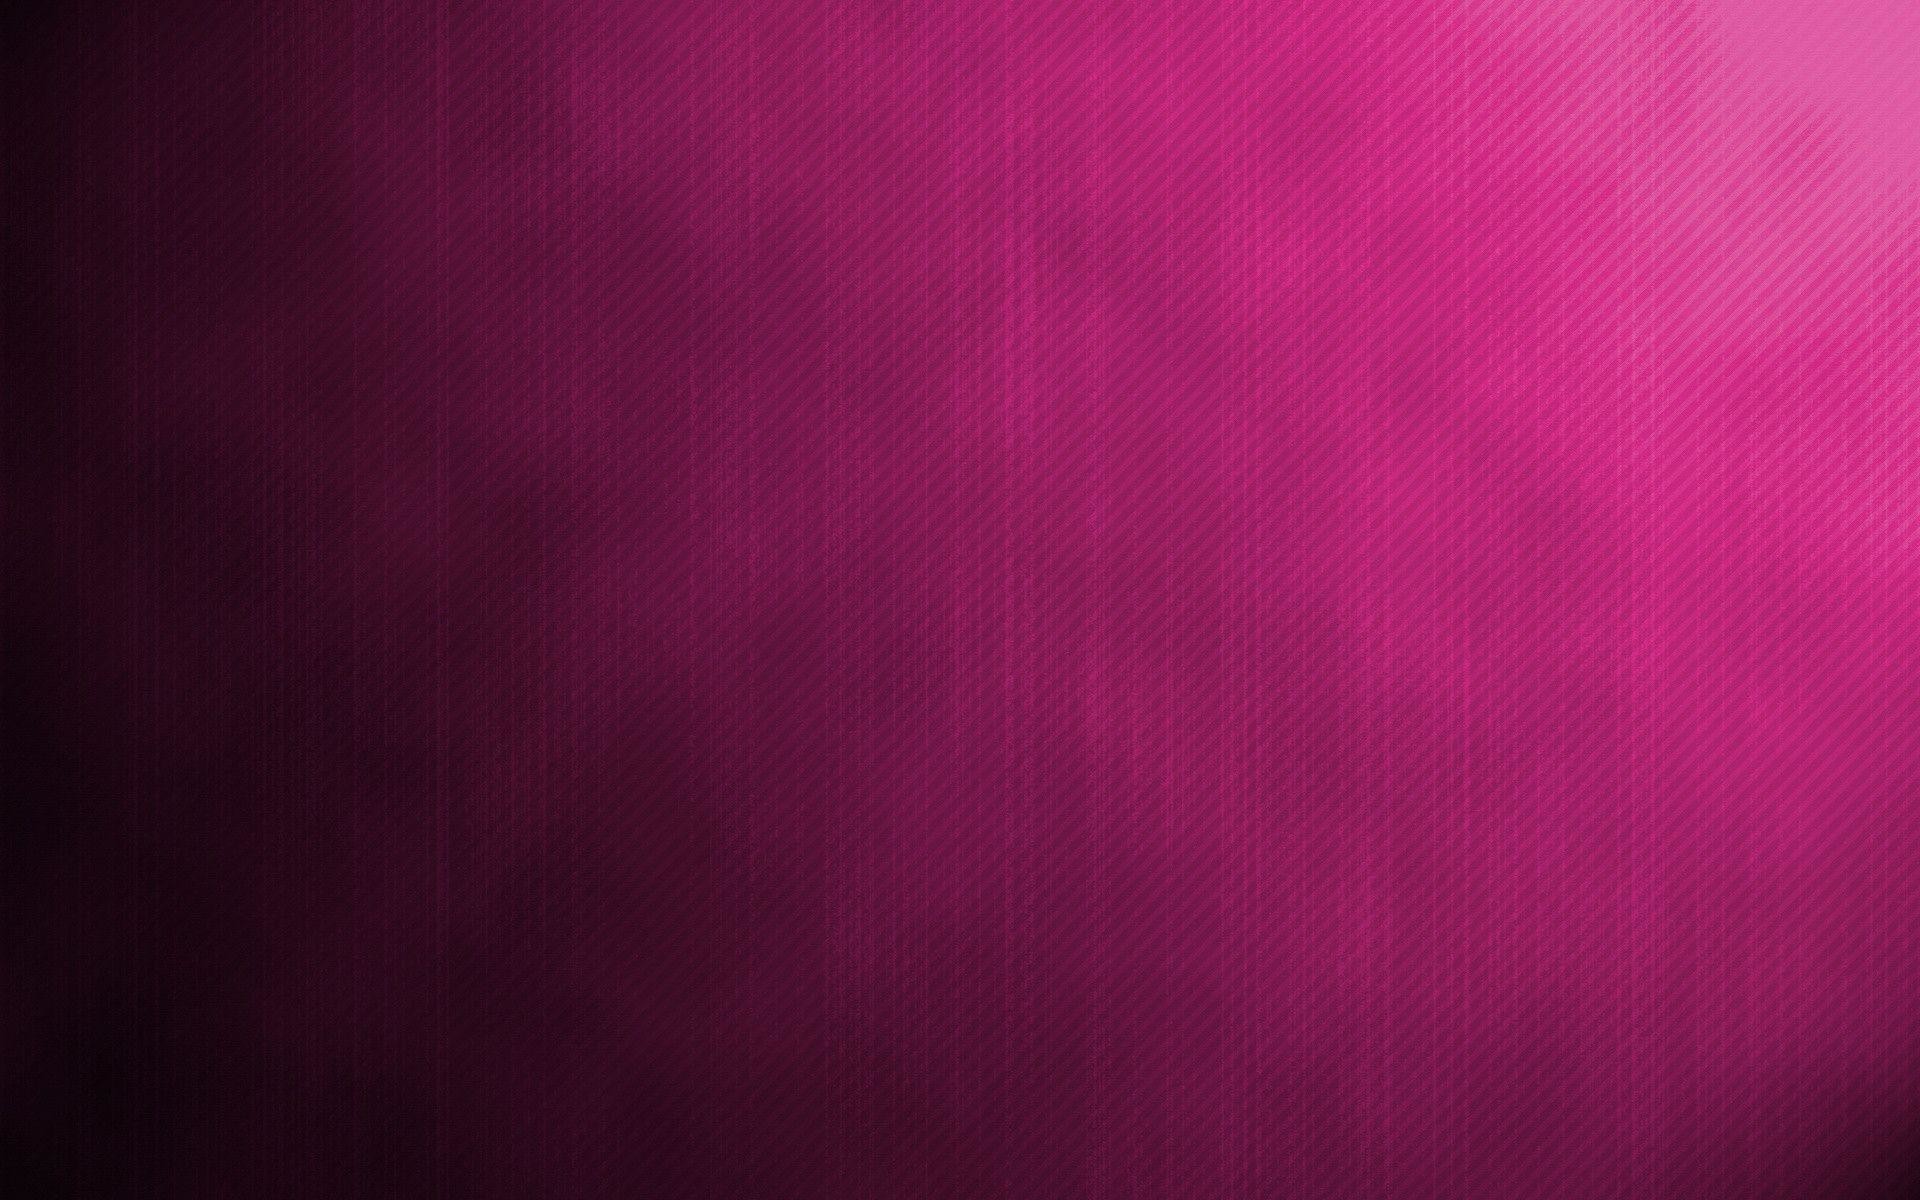 1920x1200 Simply Pink HD resolution background image.